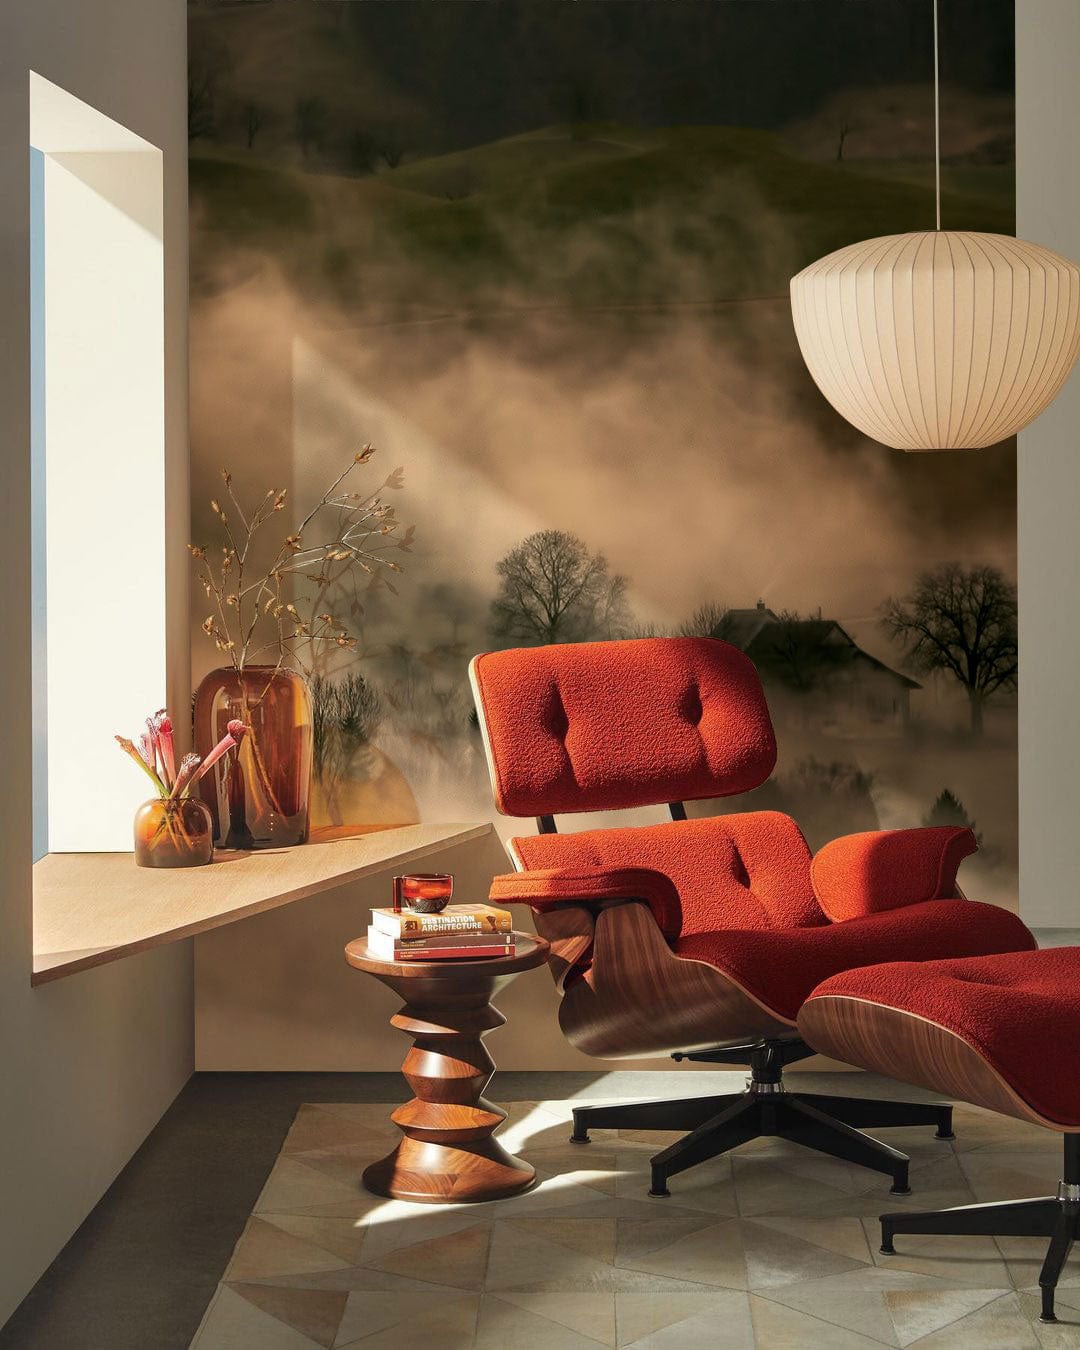 Wall Mural Wallpaper Fog Mountain Scenery Living Room or Hallway Decoration